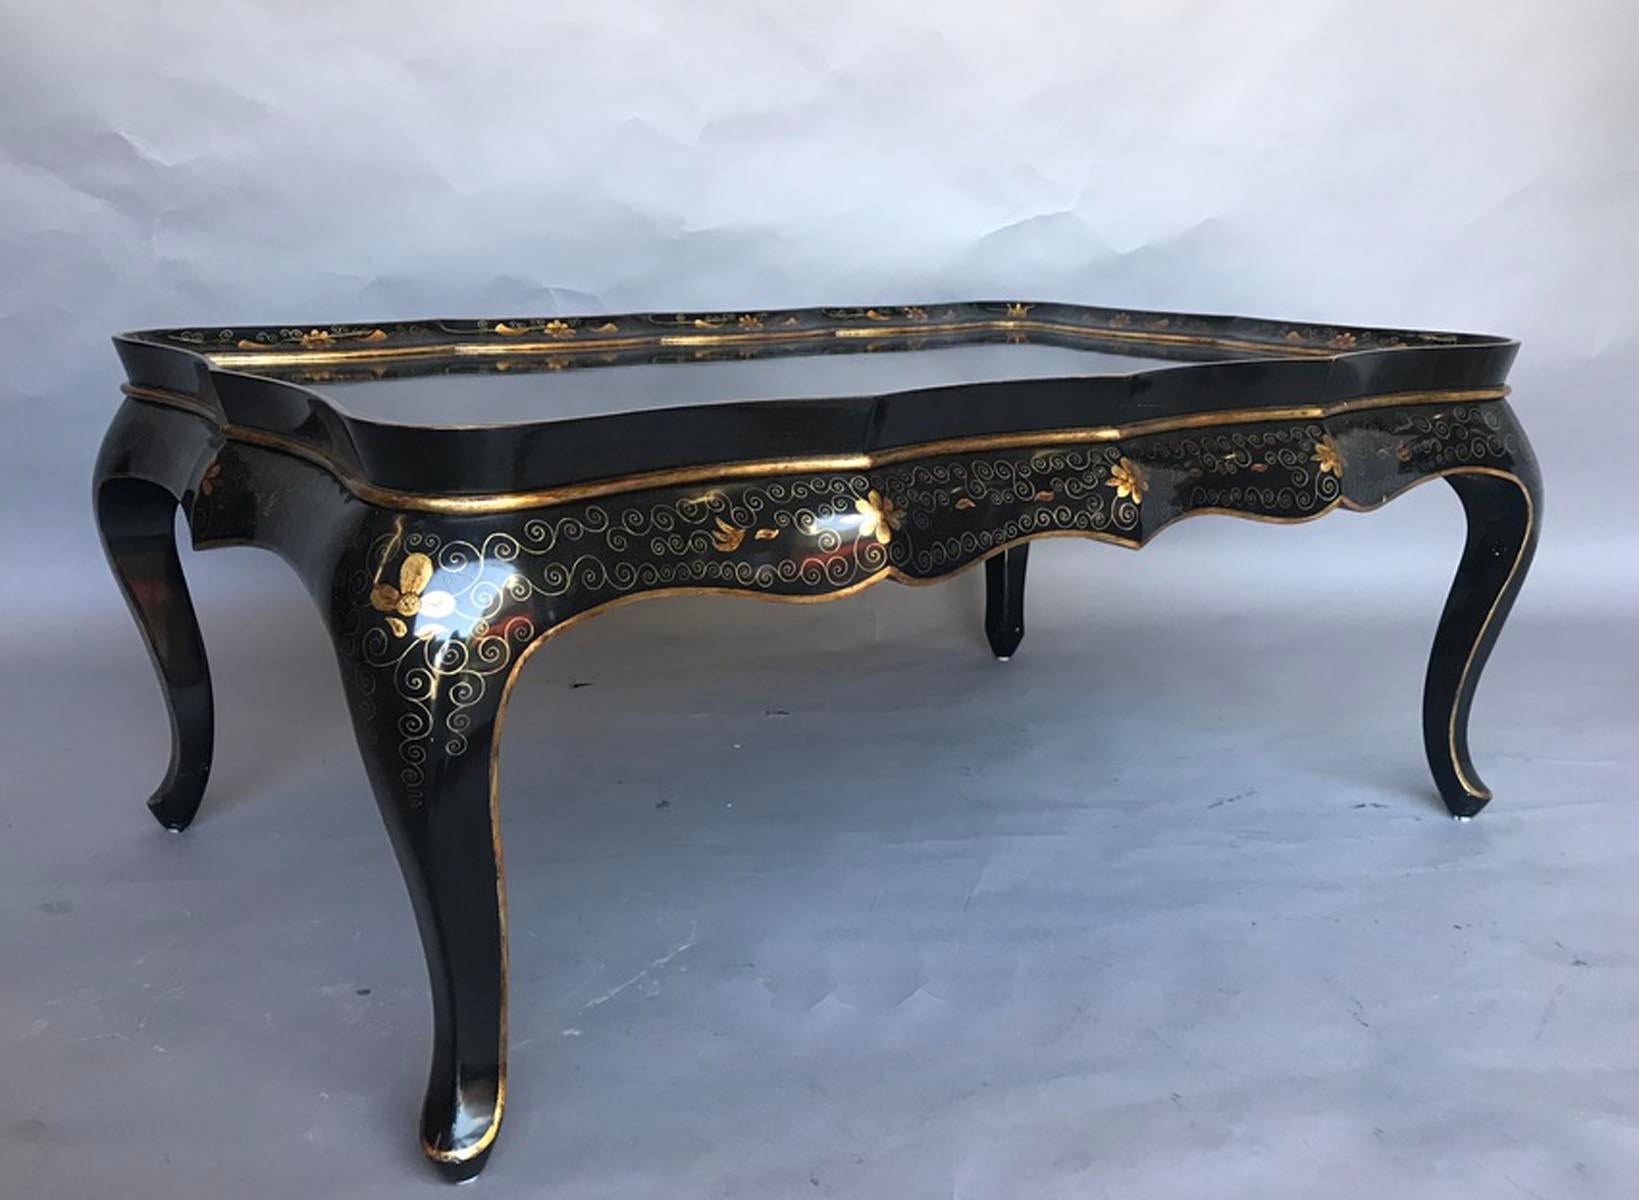 Black gloss coffee table with Queen Anne style legs. Chinese style gold chinoiserie decoration with flowers. Good condition, shows a few signs of use but doesn’t not detract from the beauty or function.